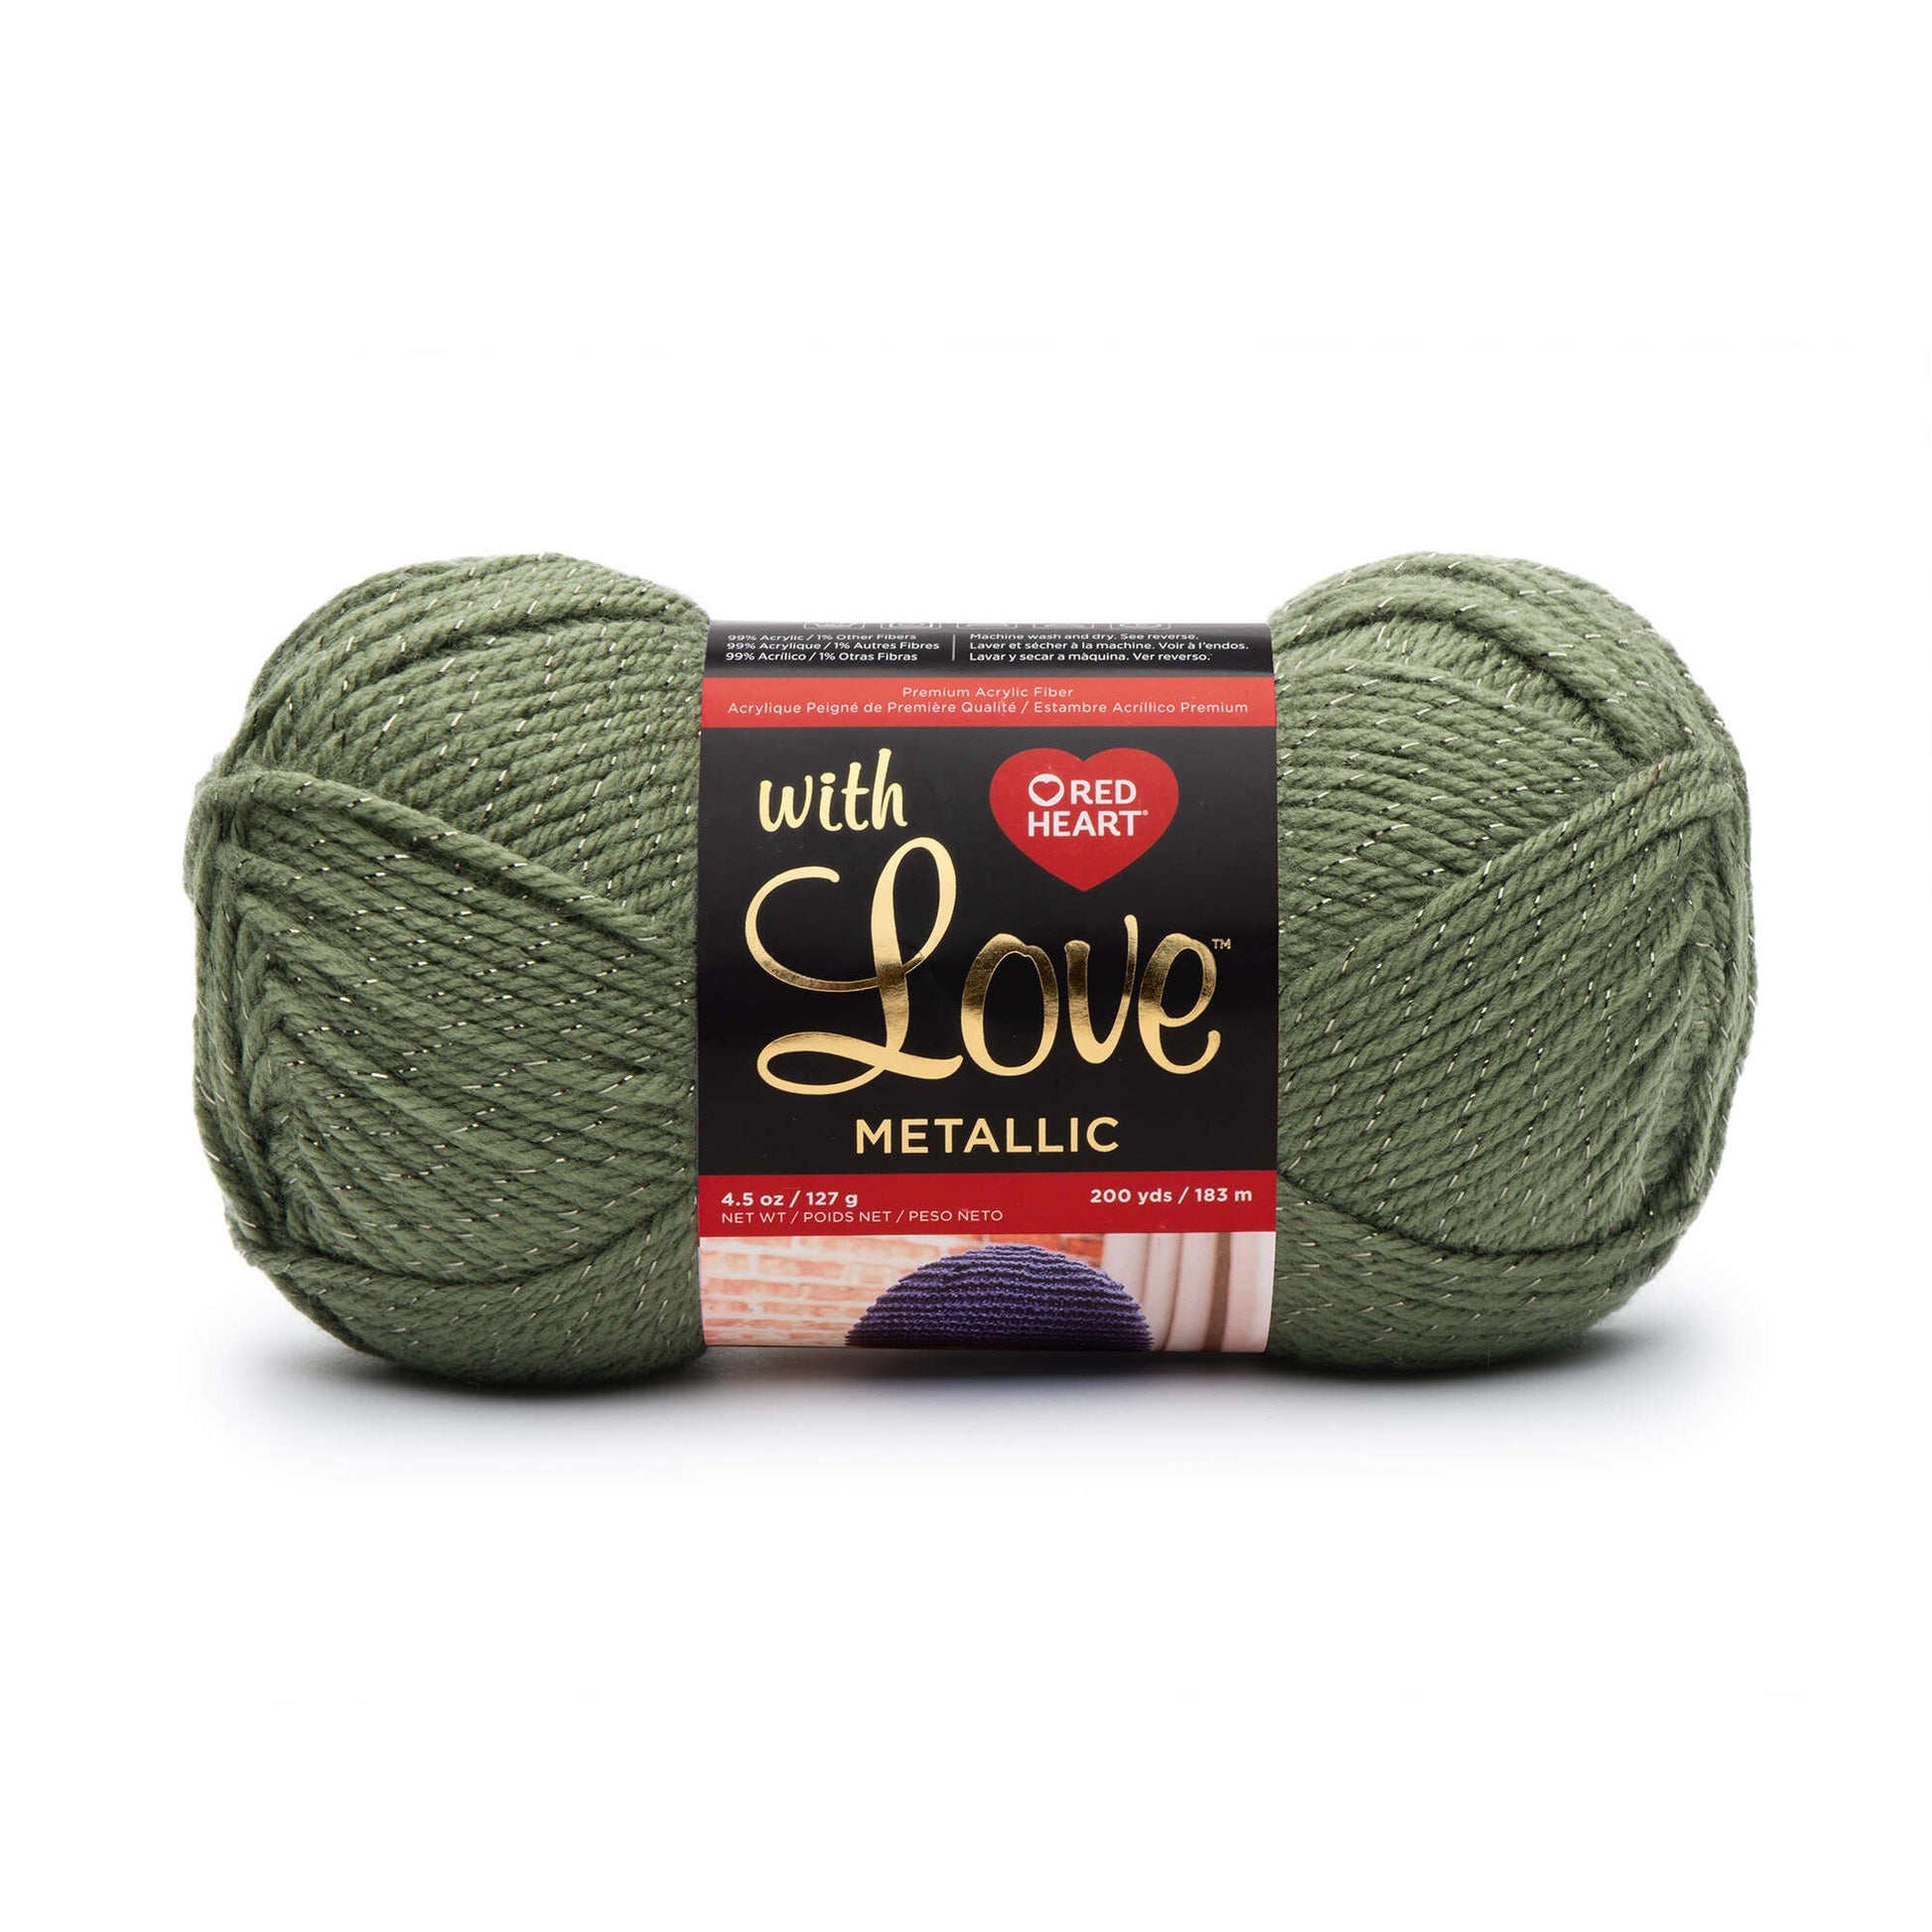 Red Heart With Love Metallic Yarn - Discontinued shades Red Heart With Love Metallic Yarn - Discontinued shades